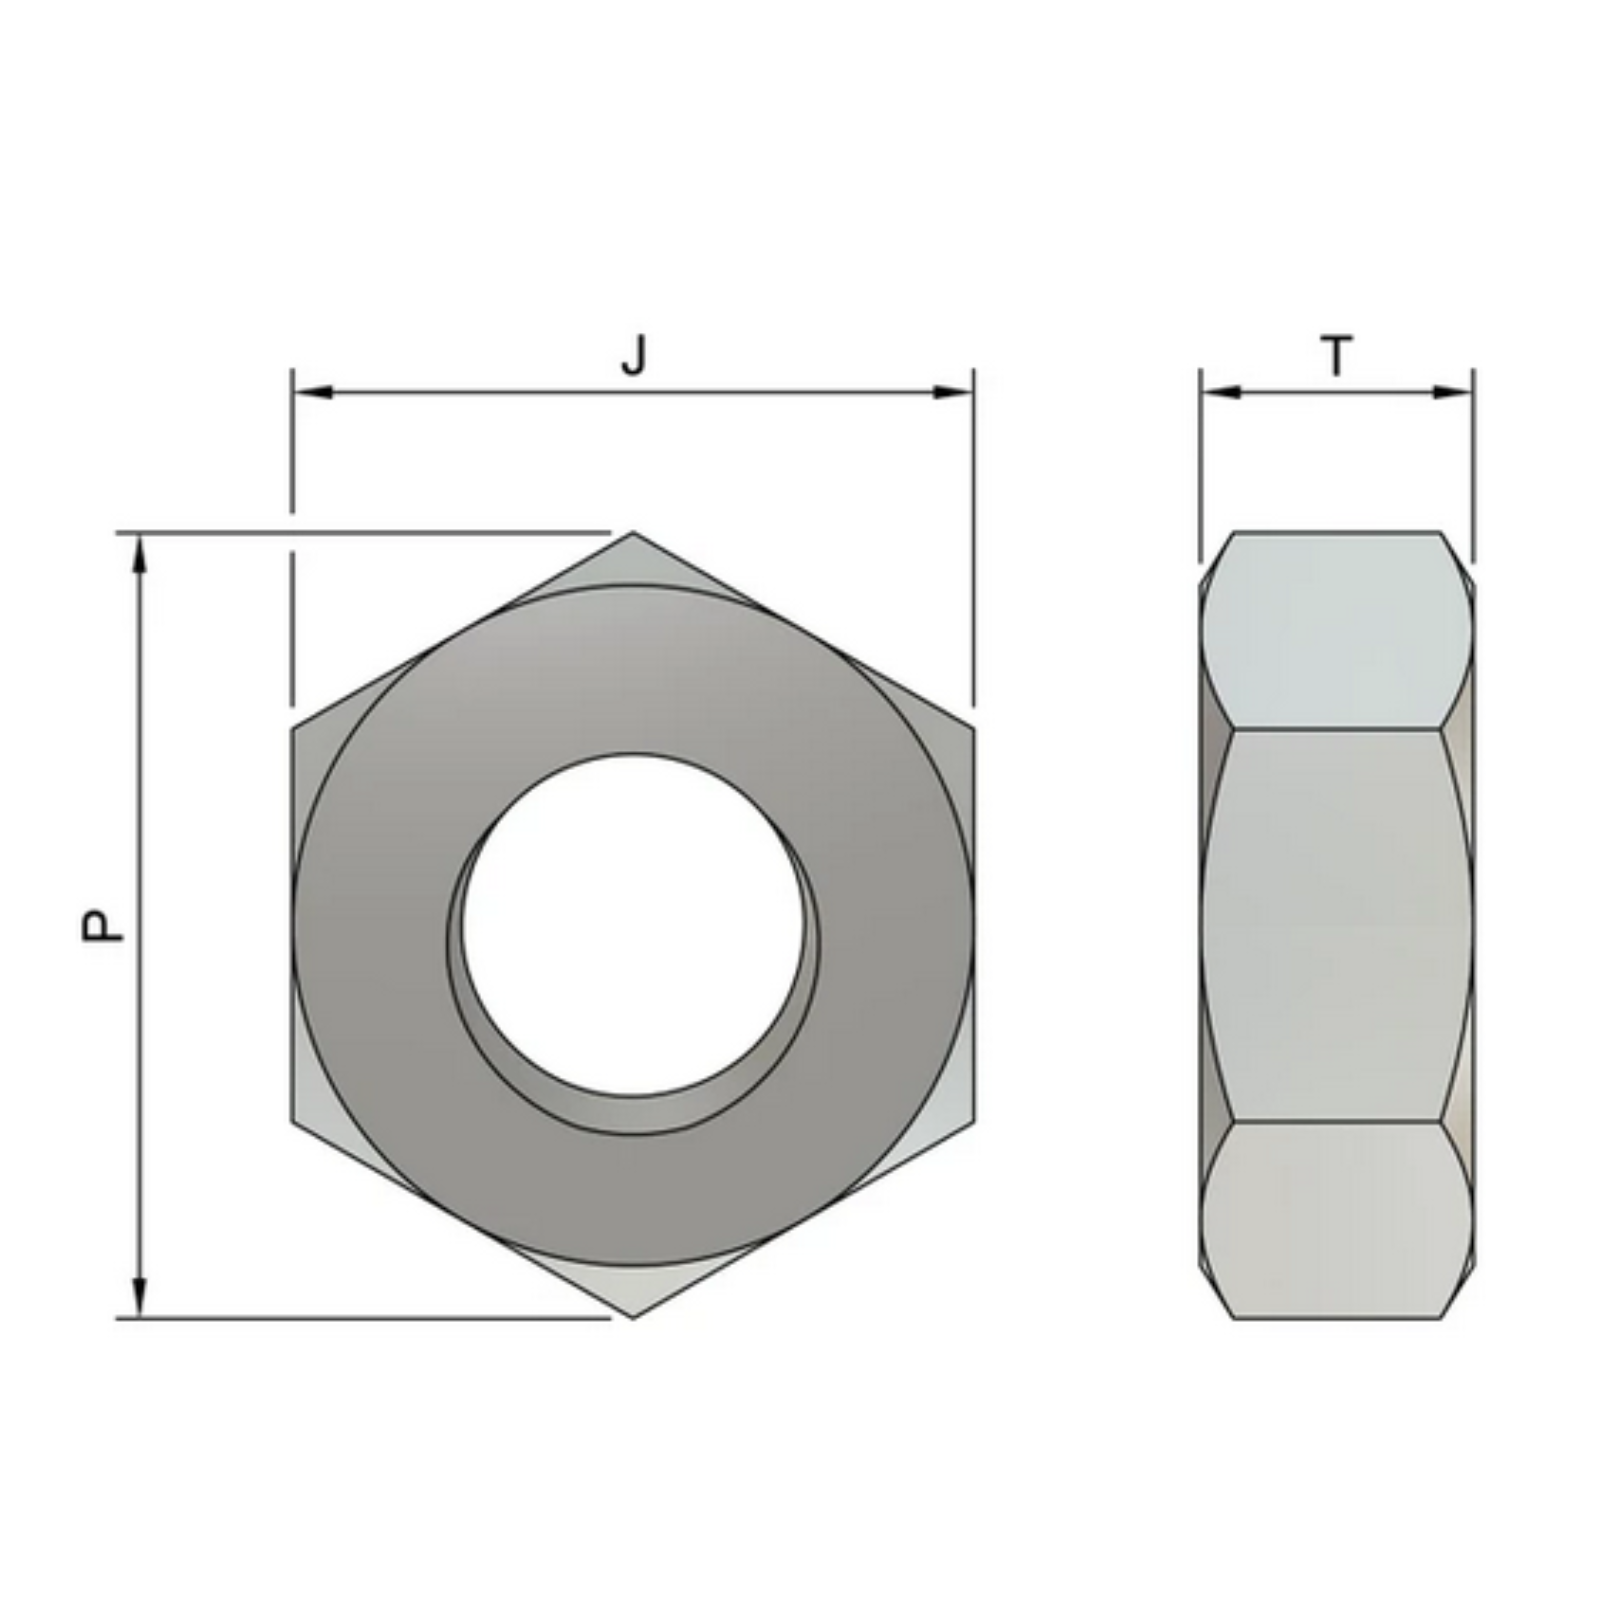 M2.5 Hexagon Nuts (DIN 934) - Stainless Steel (A2)